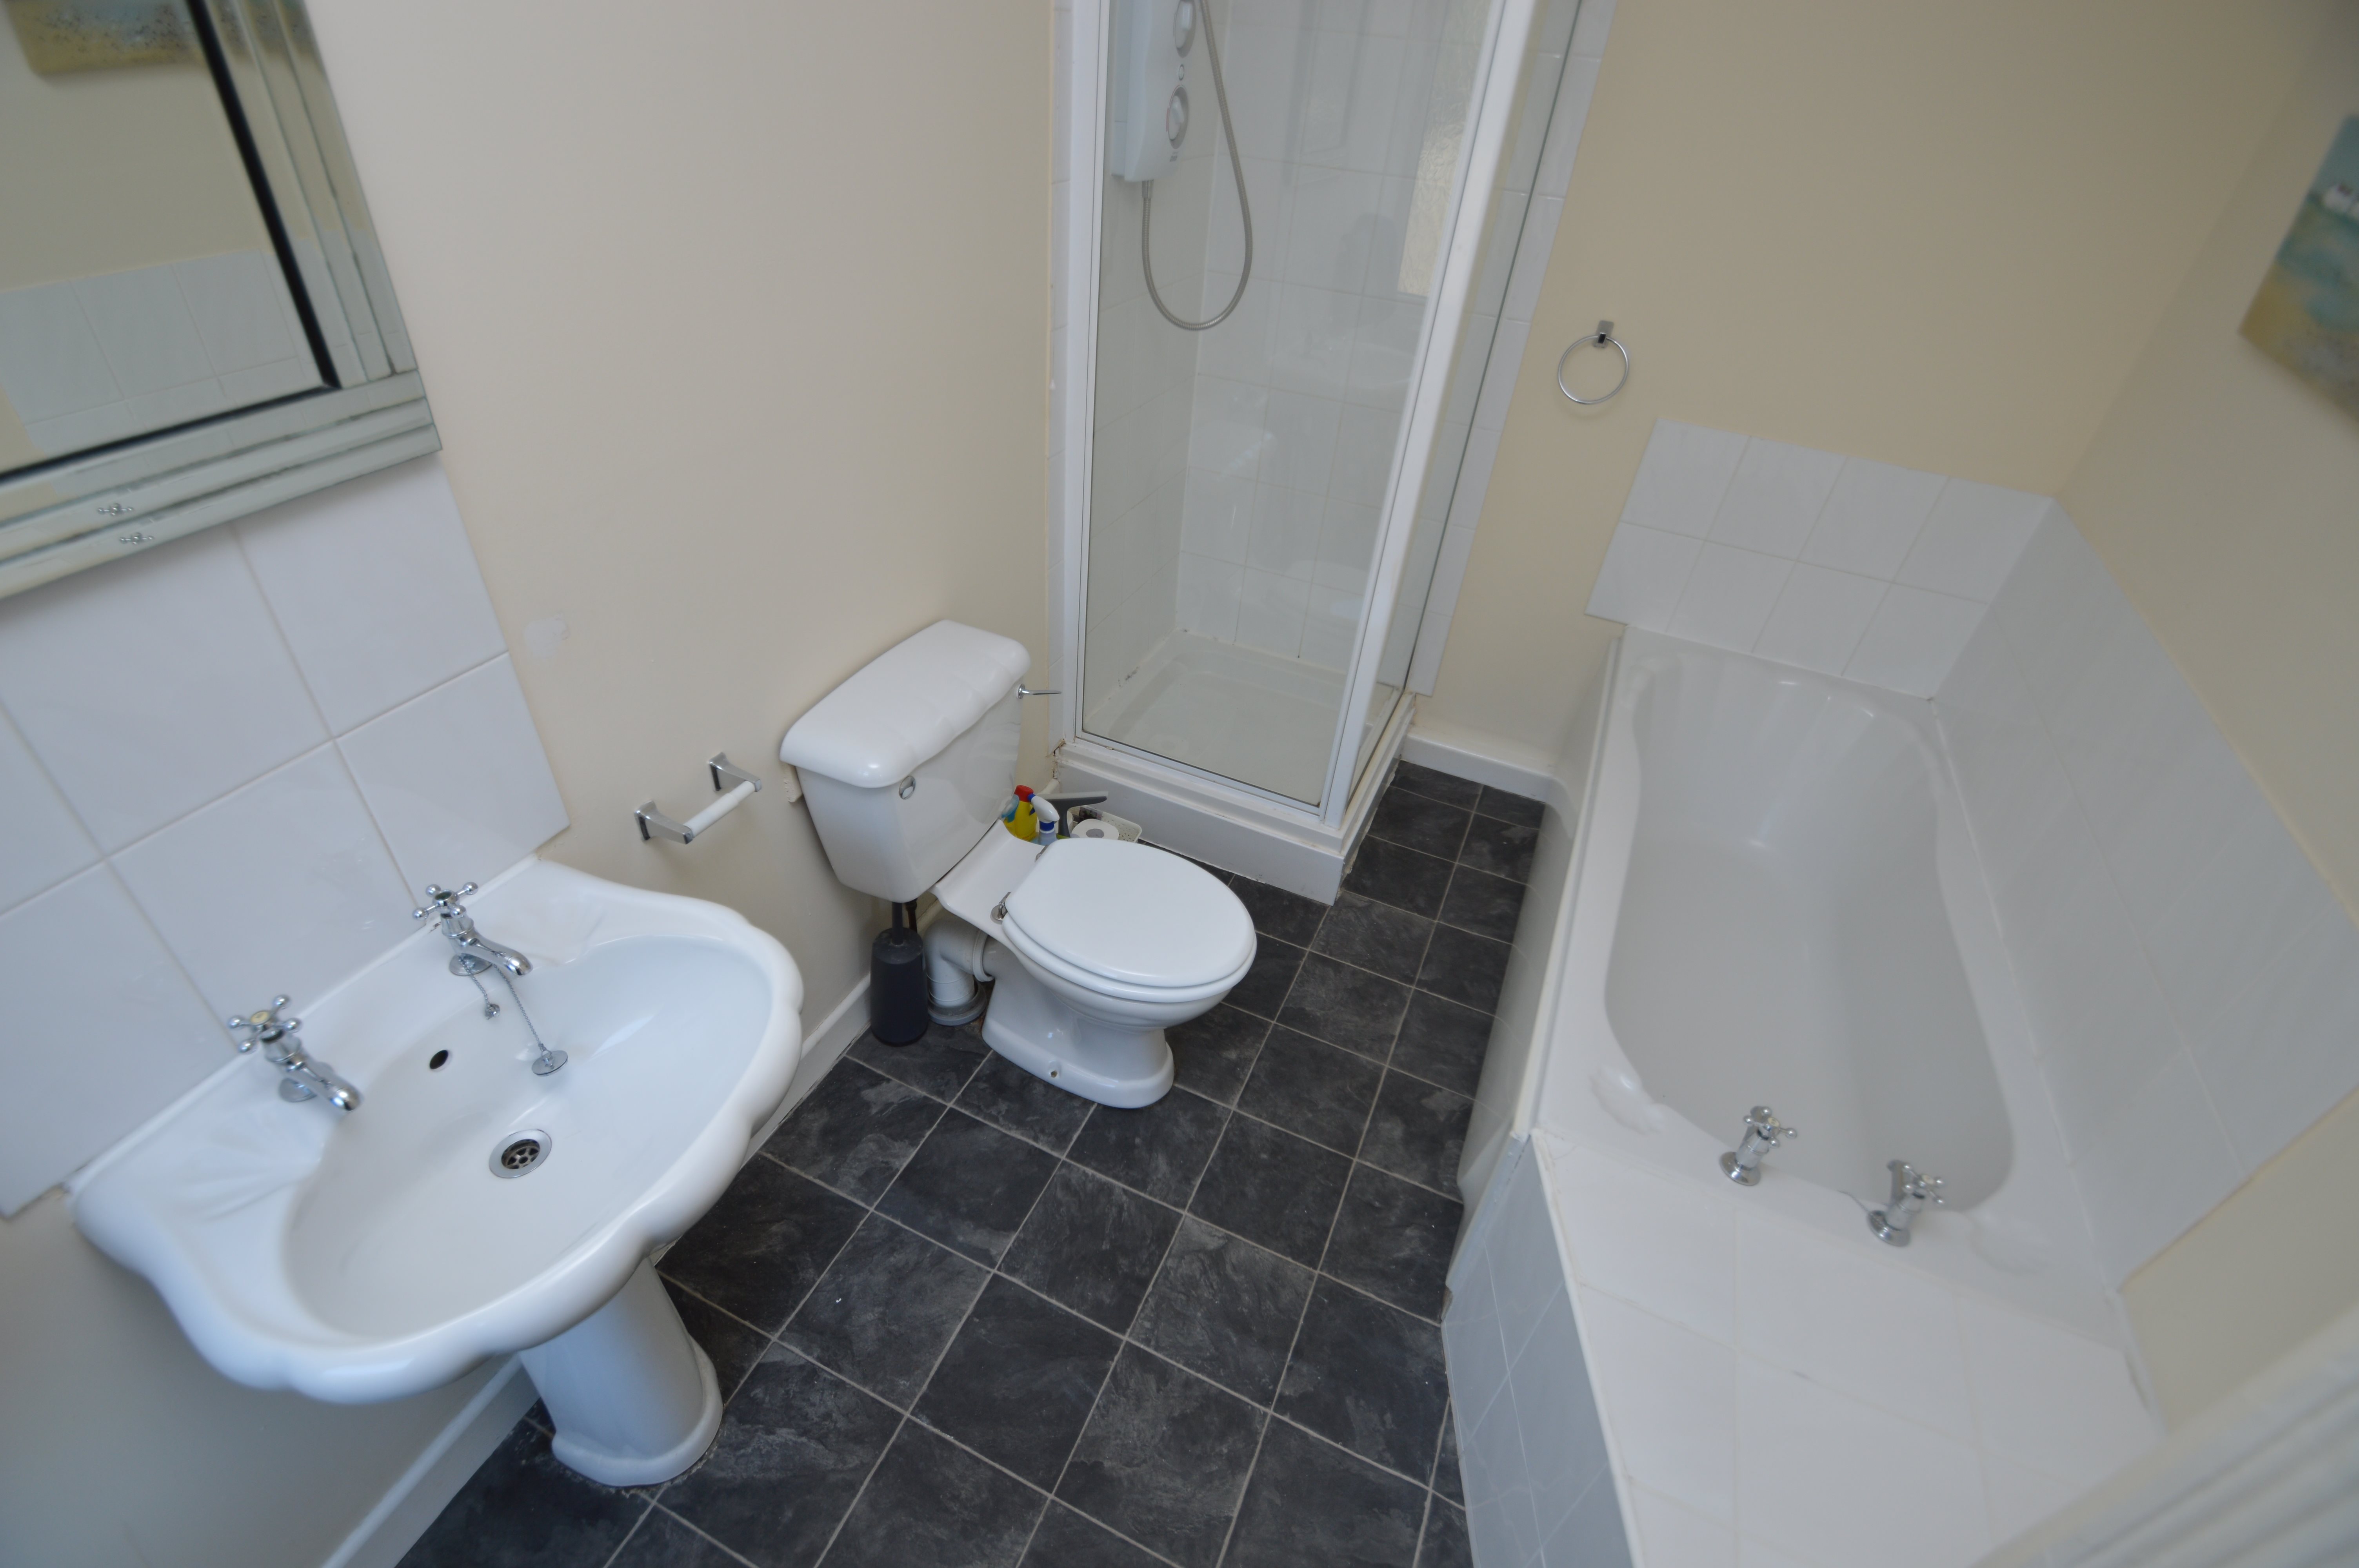 1 bed house / flat share to rent in Wood Road, Treforest  - Property Image 9